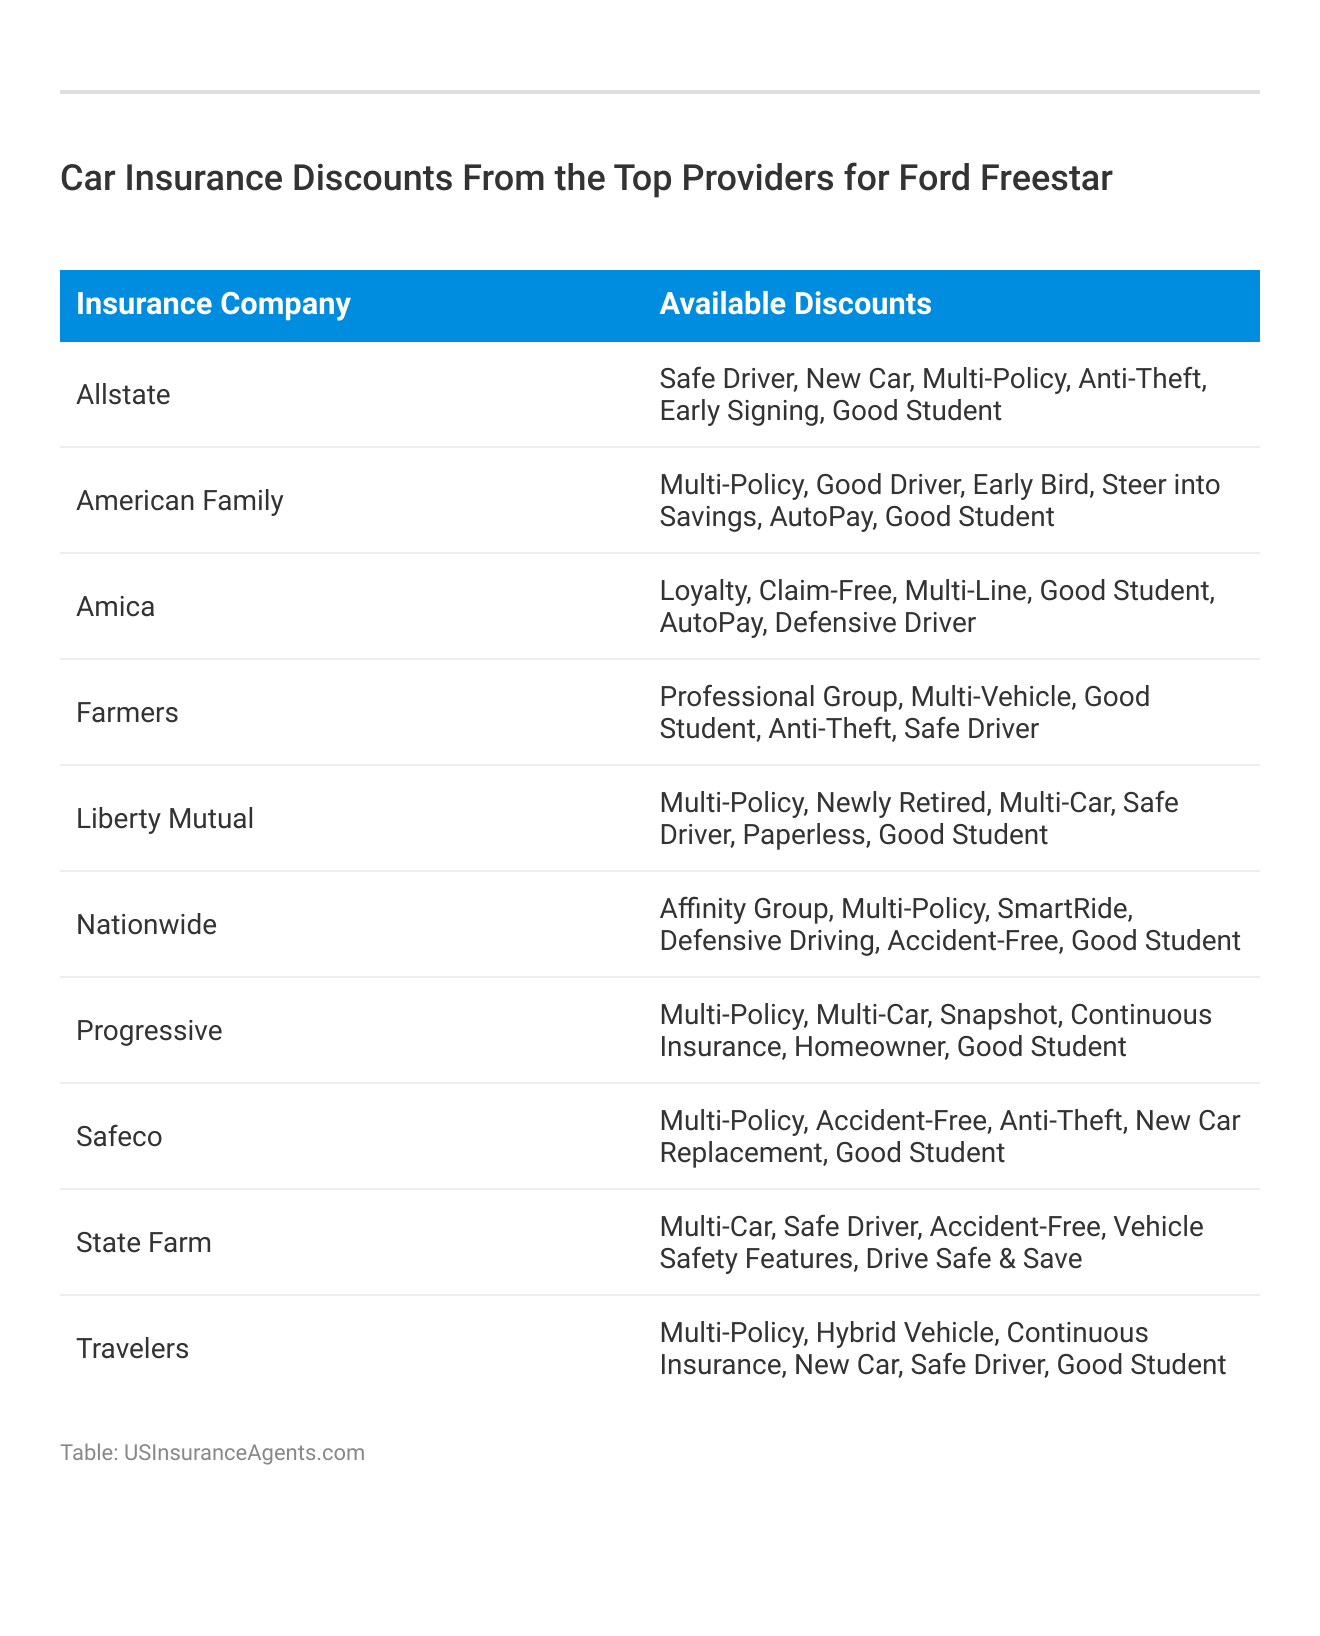 <h3>Car Insurance Discounts From the Top Providers for Ford Freestar</h3>